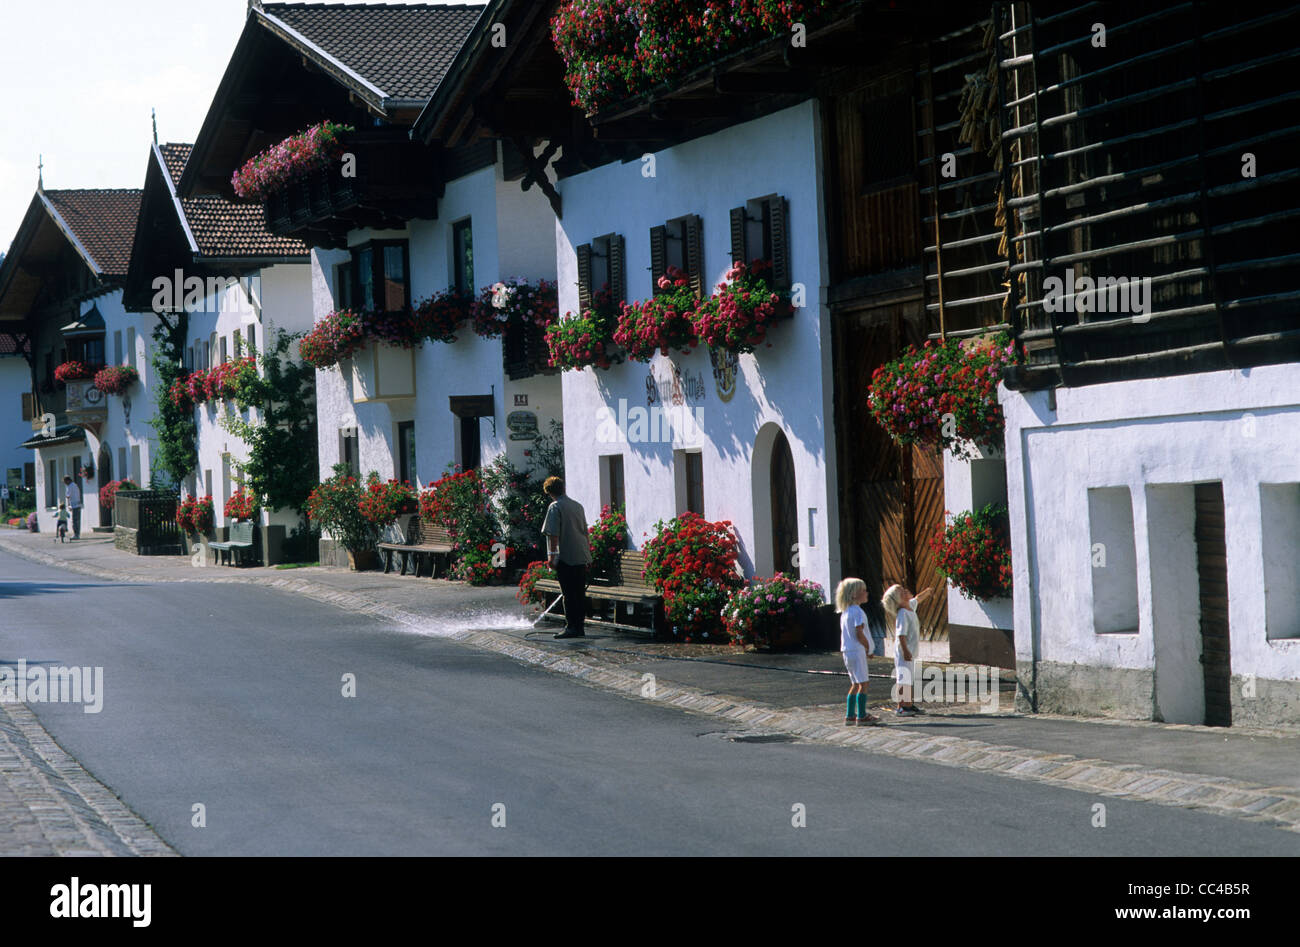 Austria, Austrian, Tirol, Mutters, the main street lined with traditional houses displaying flower boxes in full bloom. Stock Photo